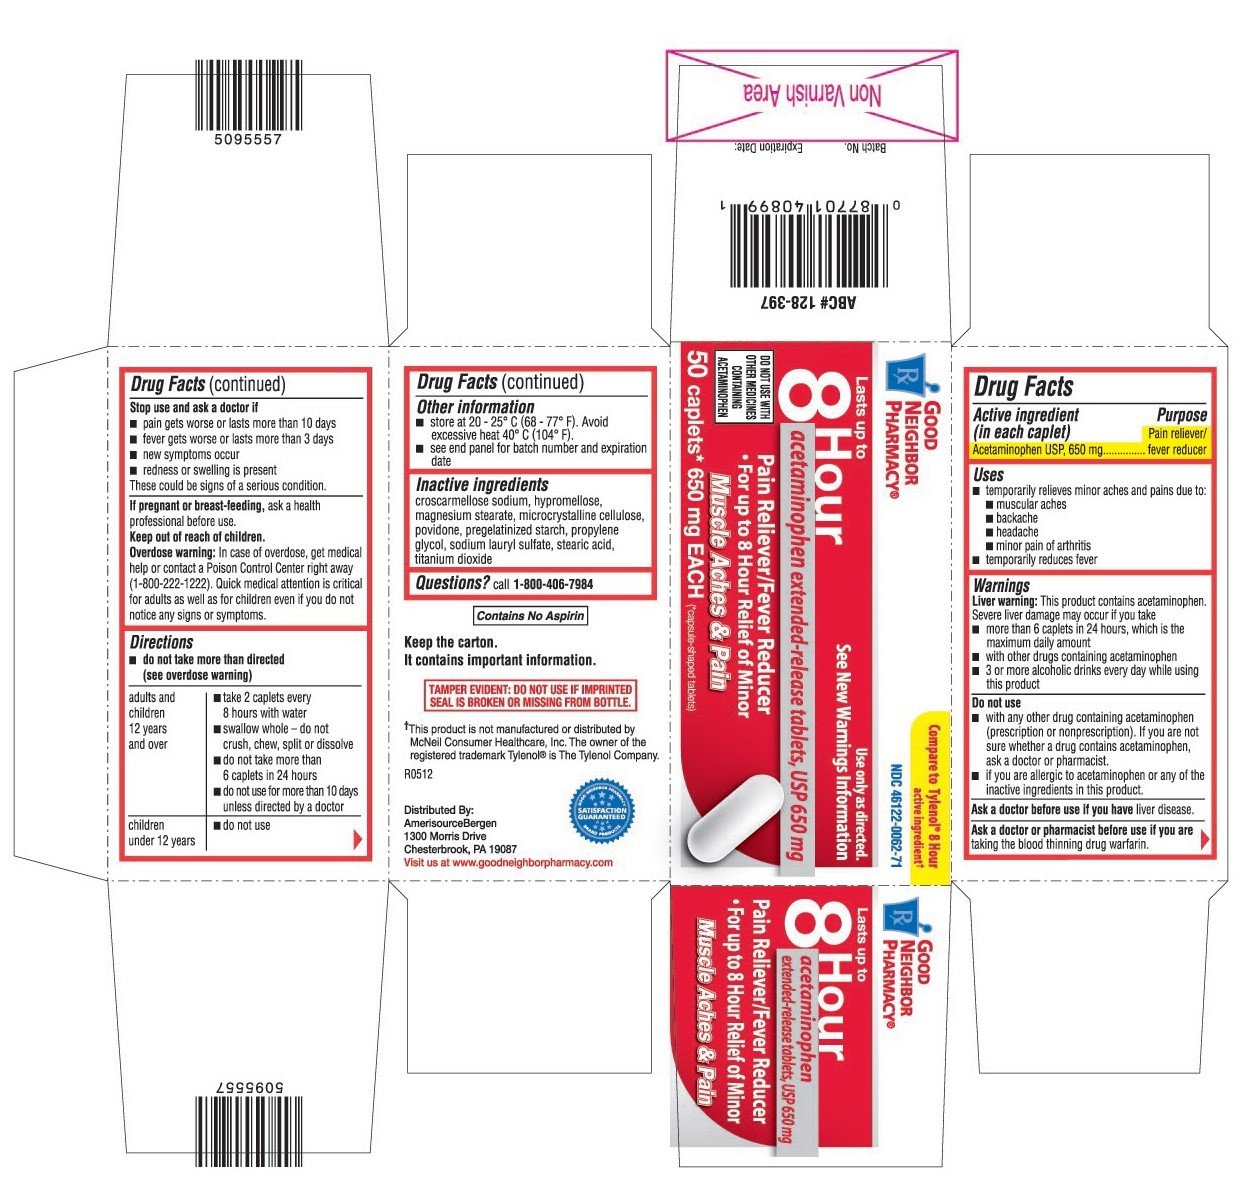 This is the 50 count bottle carton label for GNP Acetaminophen extended-release tablets, USP 650 mg.